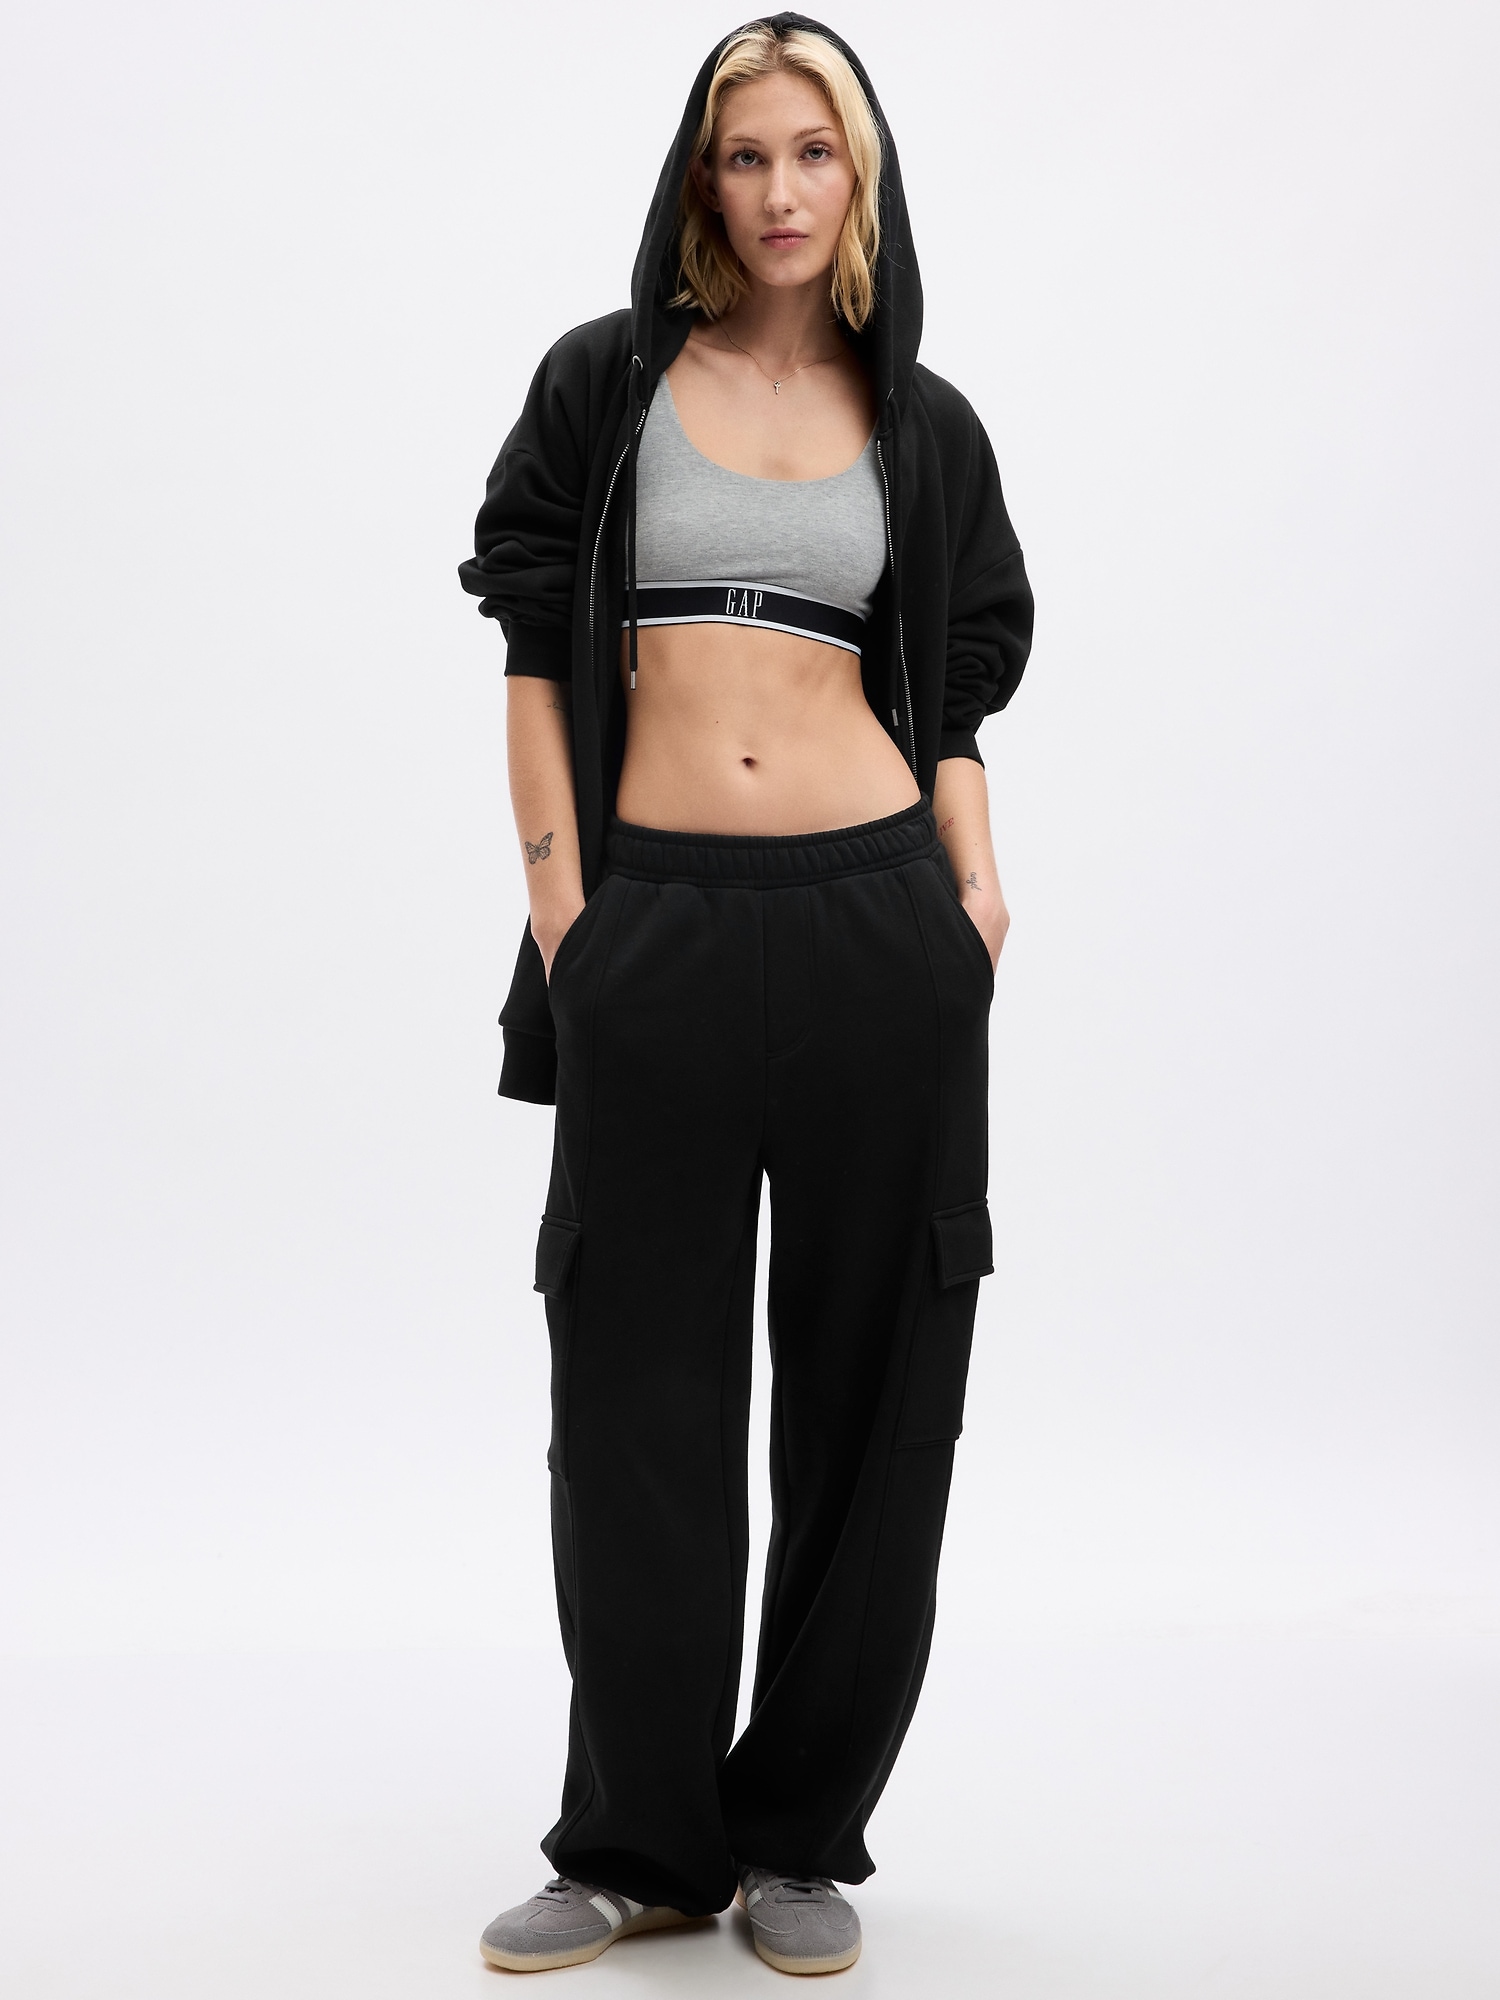 Women's Sweatpants: 400+ Items up to −66%